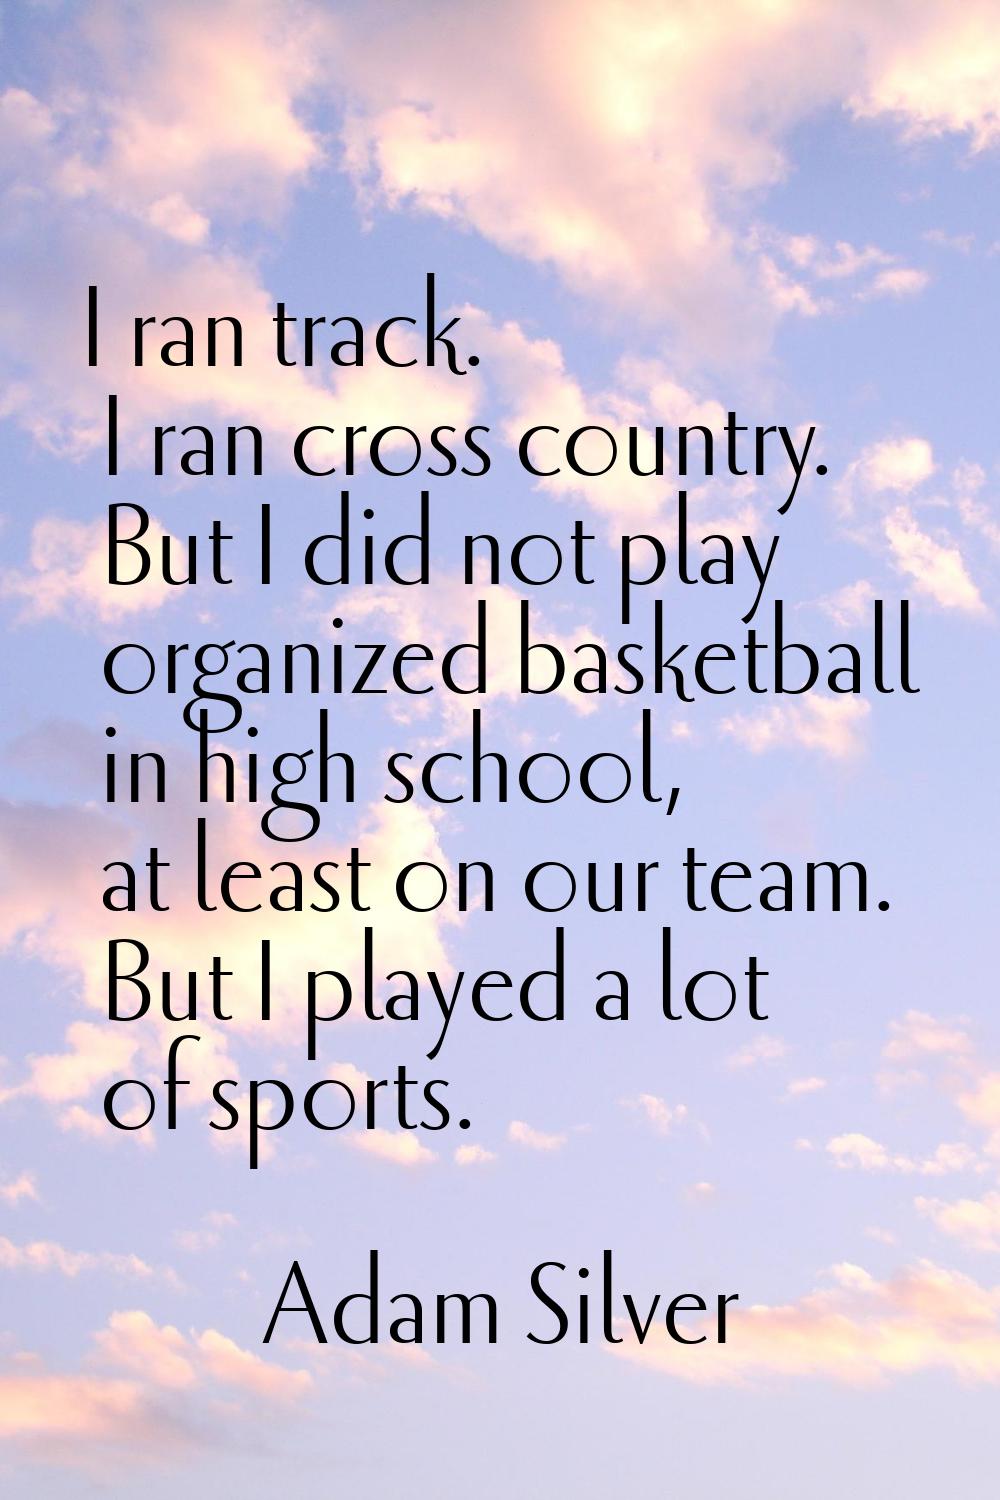 I ran track. I ran cross country. But I did not play organized basketball in high school, at least 